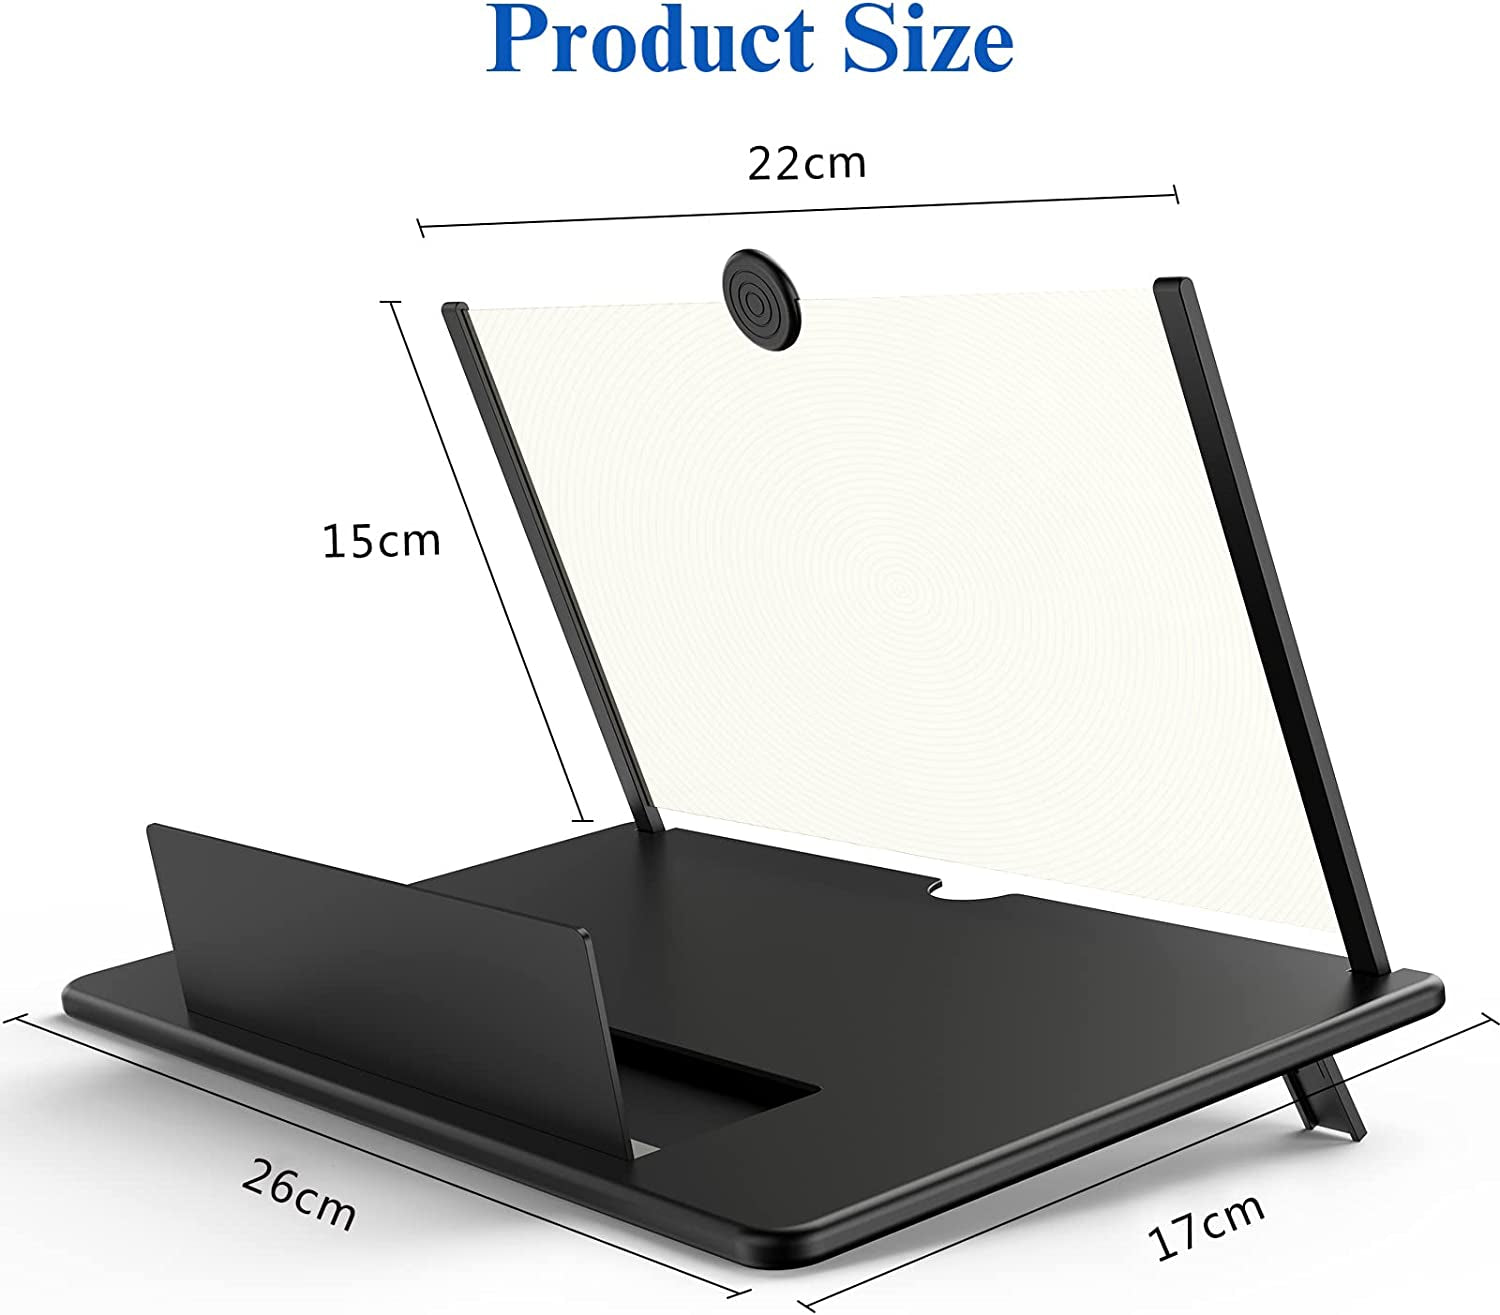 12" Screen Magnifier for Cell Phone -3D HD Magnifying Projector Screen Enlarger for Movies, Videos and Gaming – Foldable Phone Stand Holder with Screen Amplifier–Compatible with All Smartphones